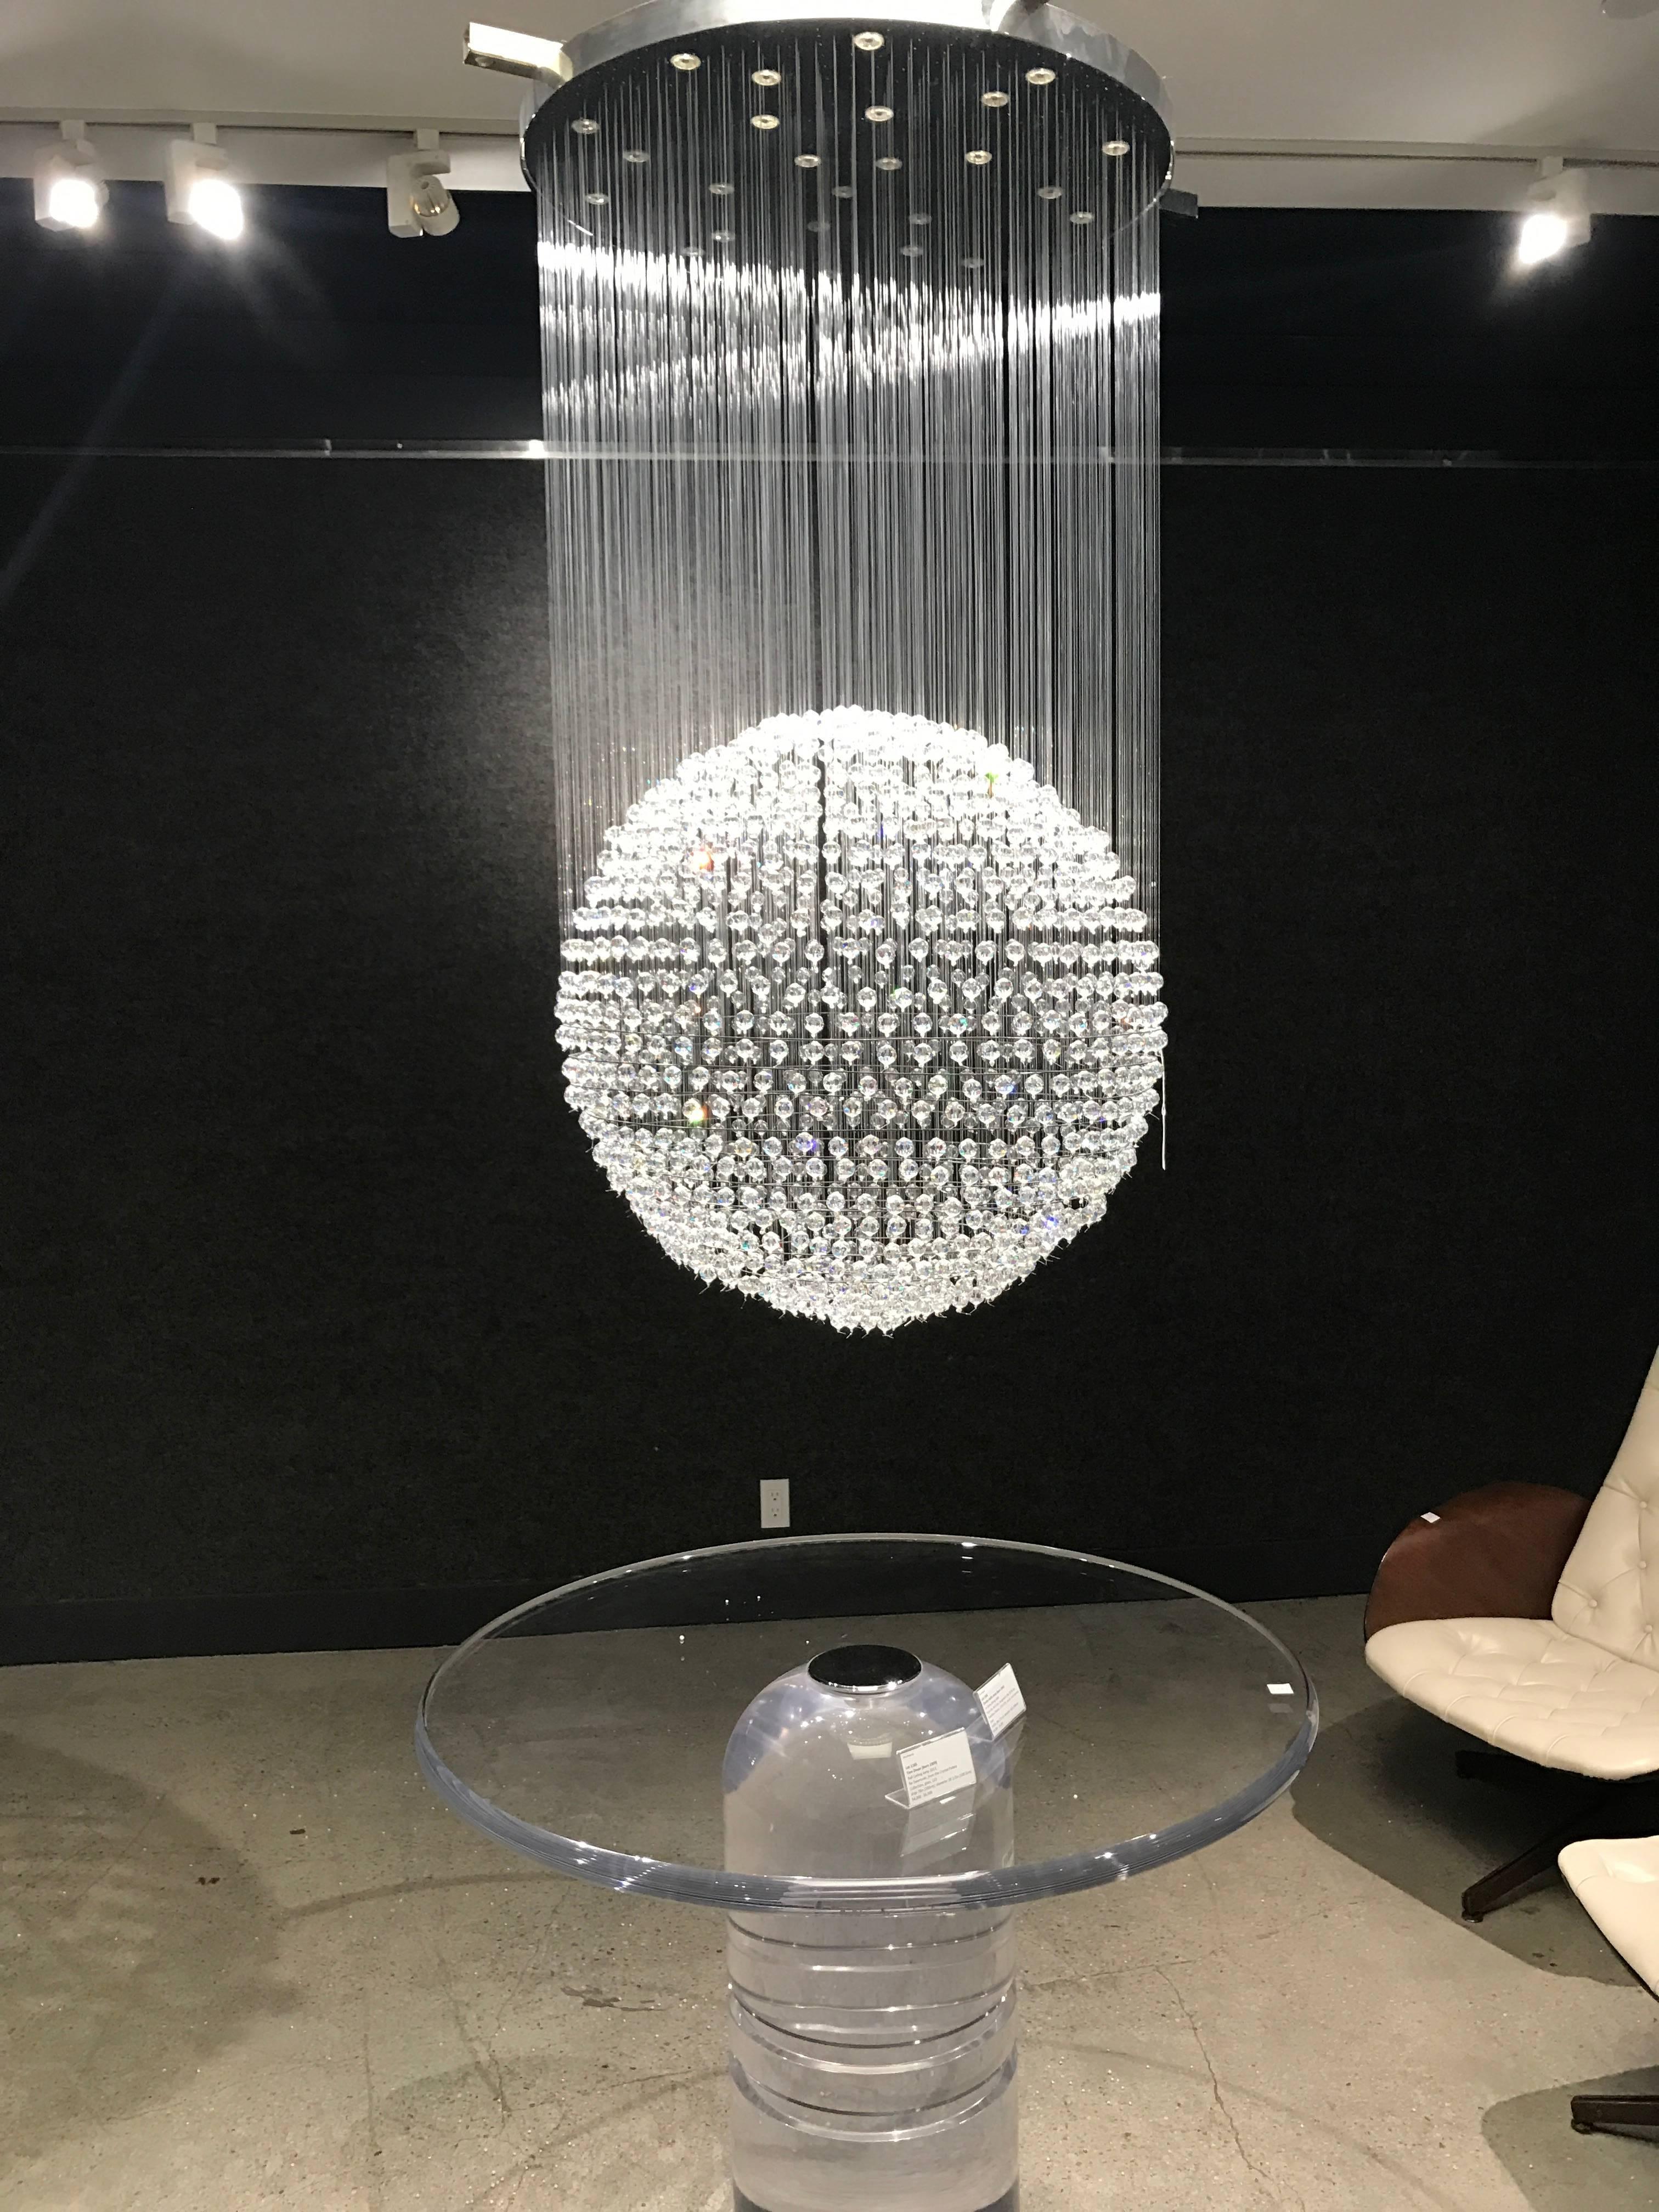 A rare limited edition Tom Dixon designed chandelier for Swarovski for the Crystal Palace collection. The chandelier is composed of a polished chrome fixture with hundreds of large Swarovski crystals hanging from clear threads to form one large